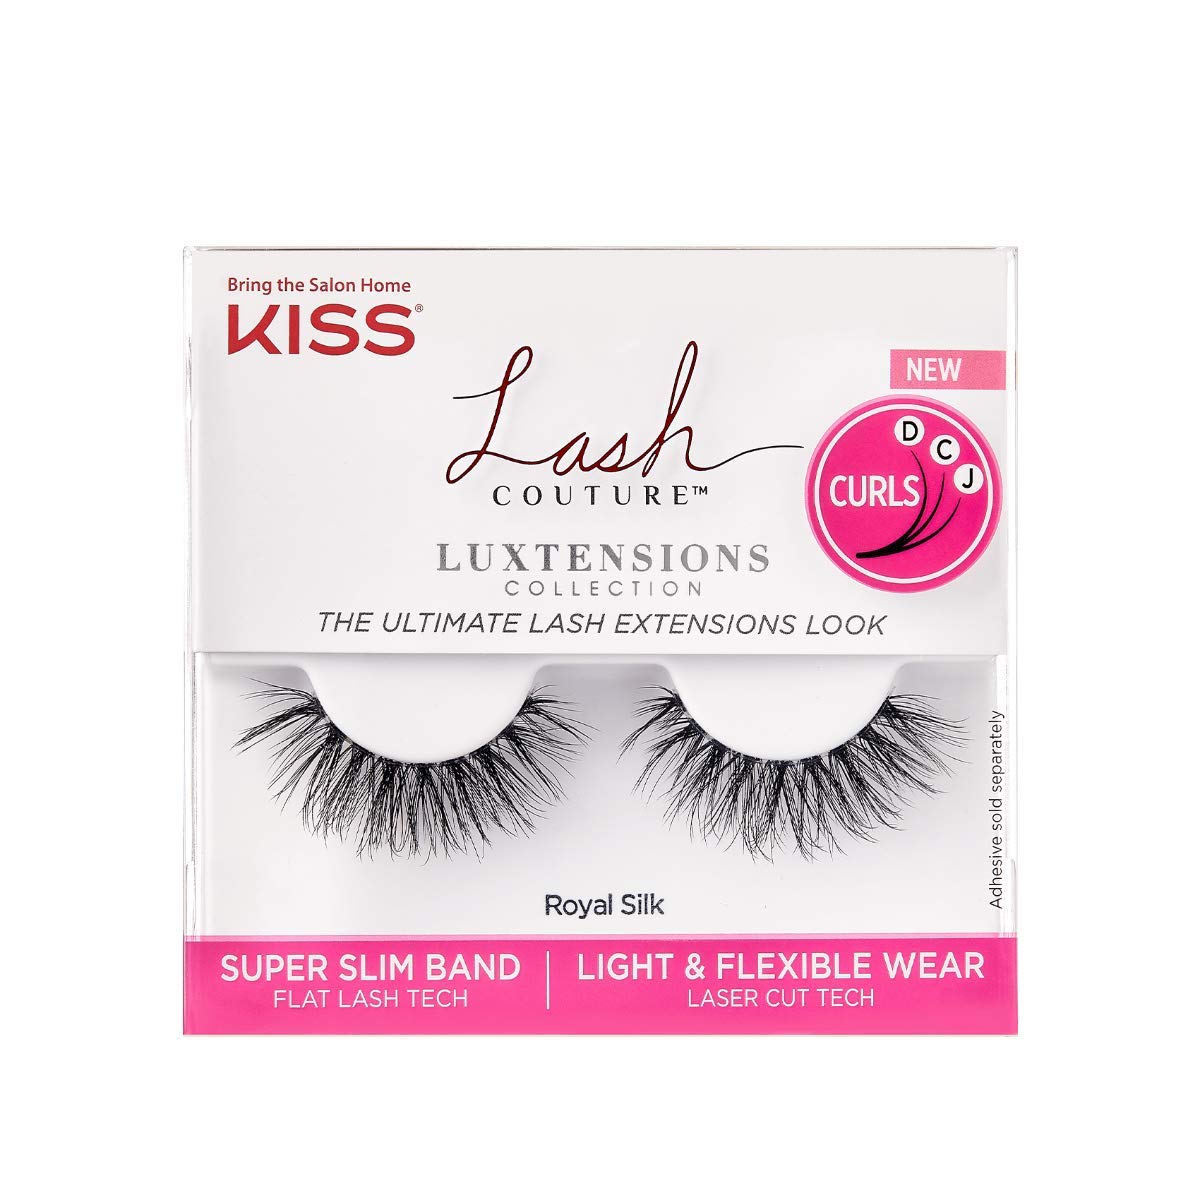 KISS Lash Couture Luxtension False Eyelashes, Royal Silk, 10 mm, Includes 1 Pair Of Lash, Contact Lens Friendly, Easy to Apply, Reusable Strip Lashes